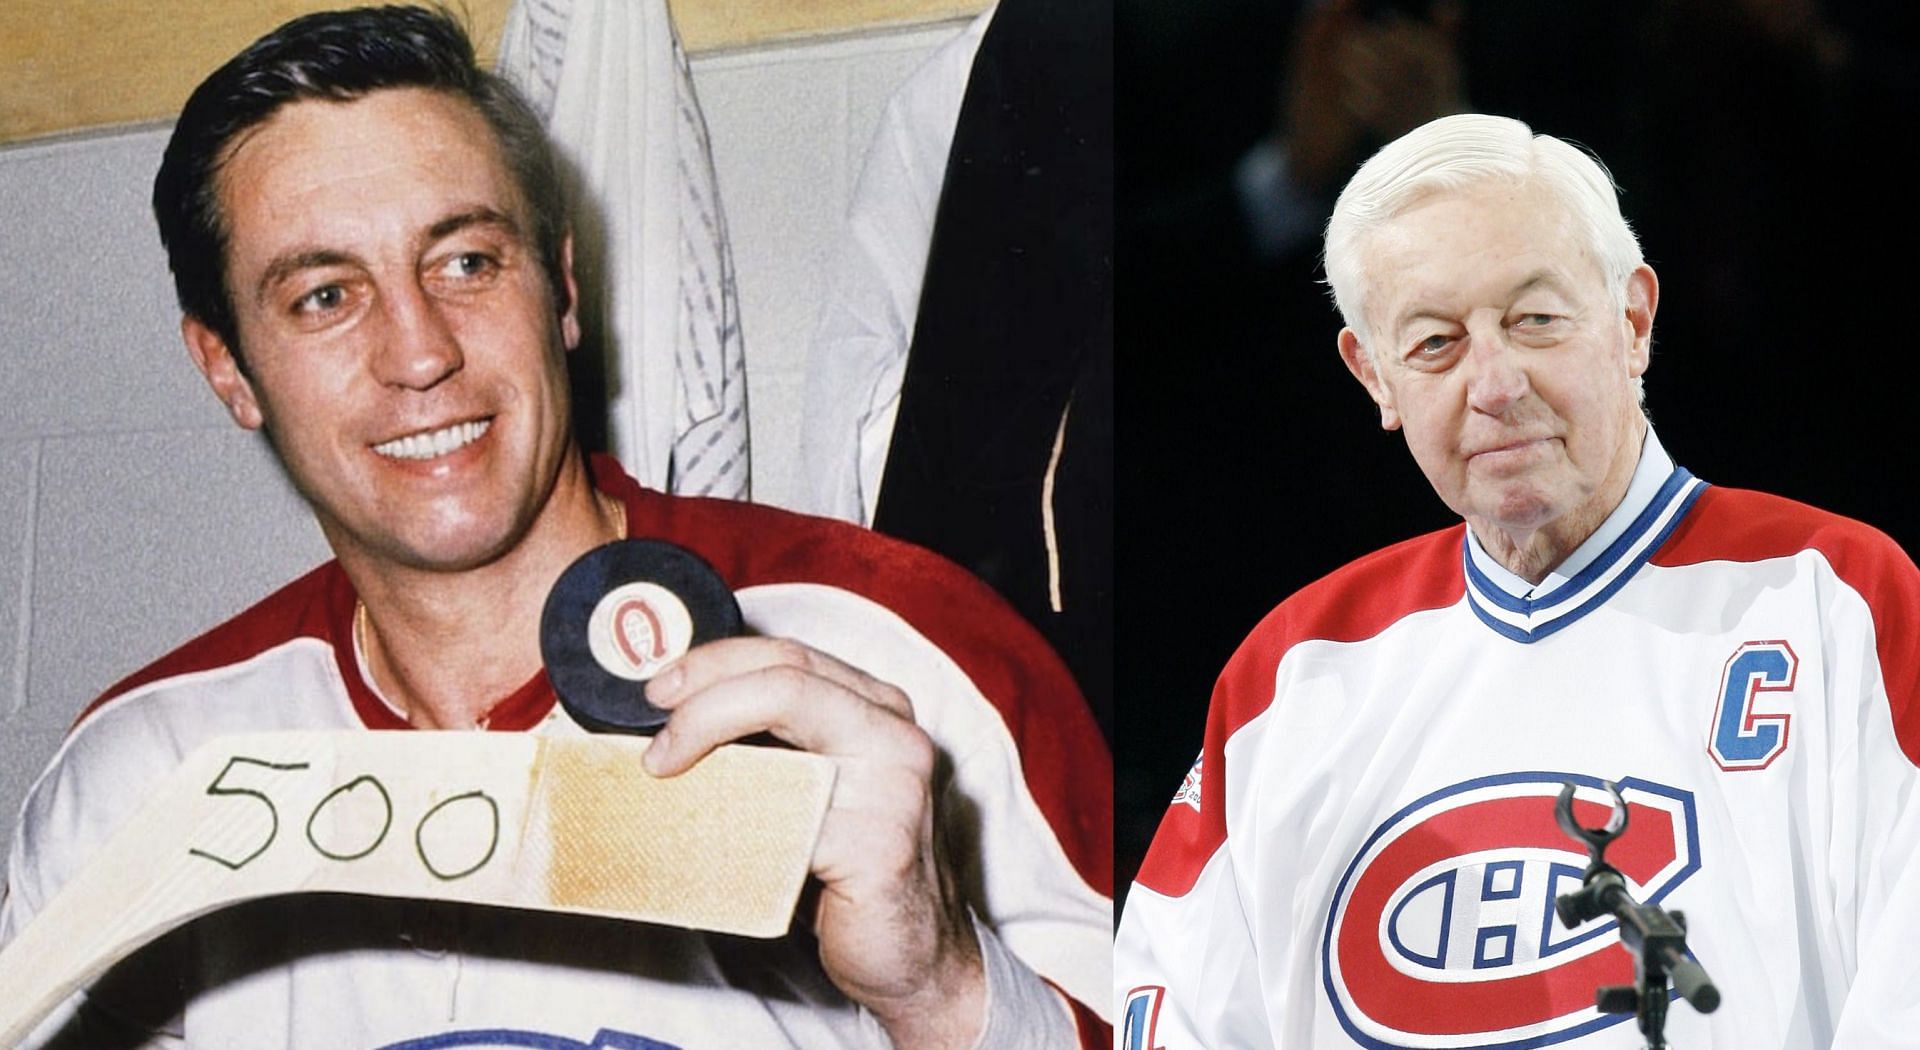 Montreal Canadiens legend Jean Believeau once had a police officer offer to be his personal valet